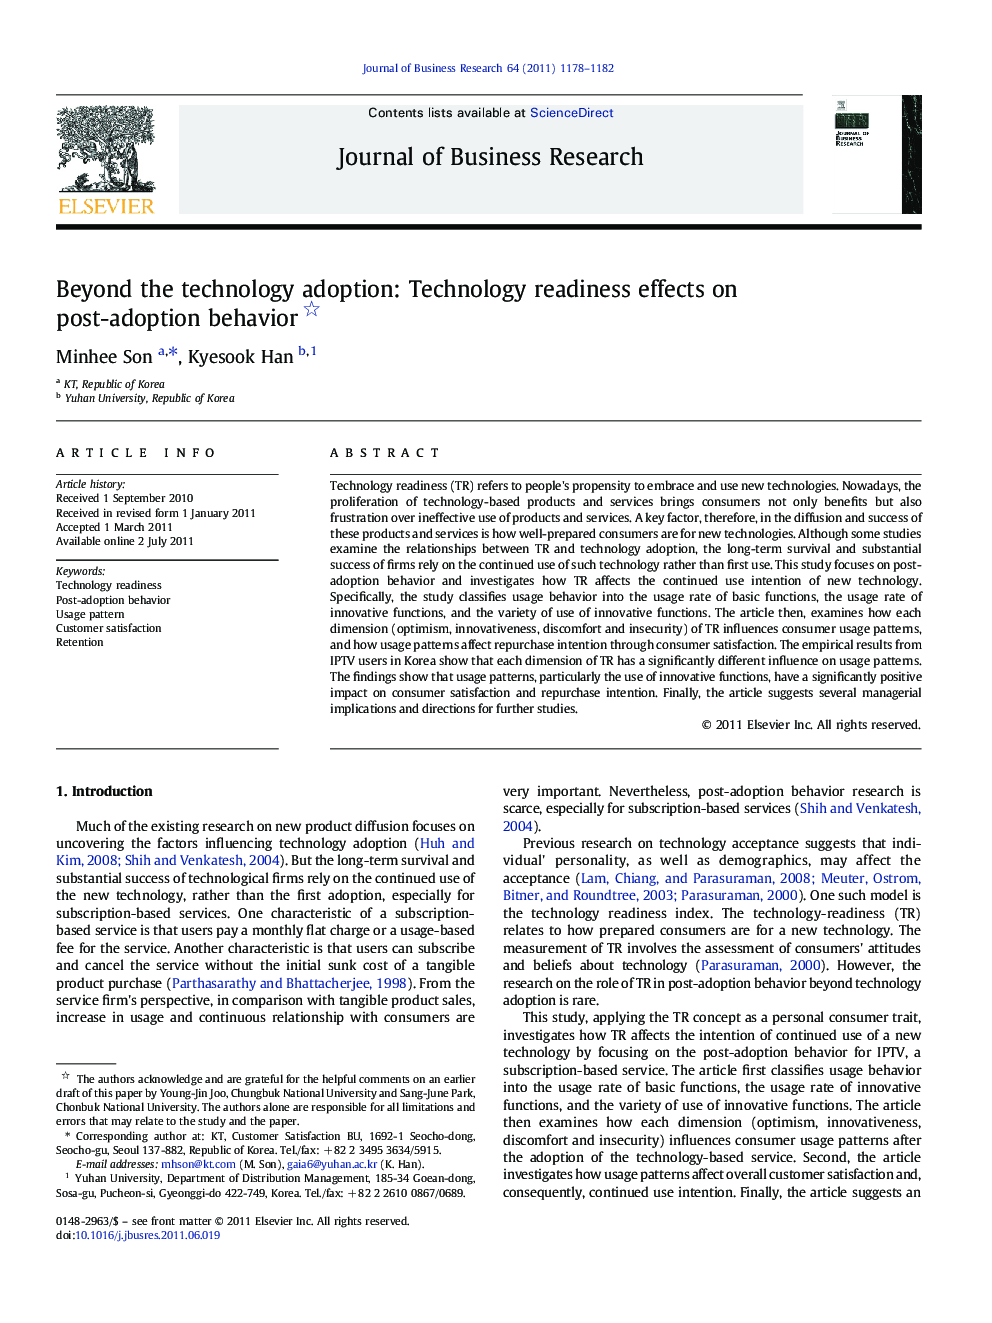 Beyond the technology adoption: Technology readiness effects on post-adoption behavior 